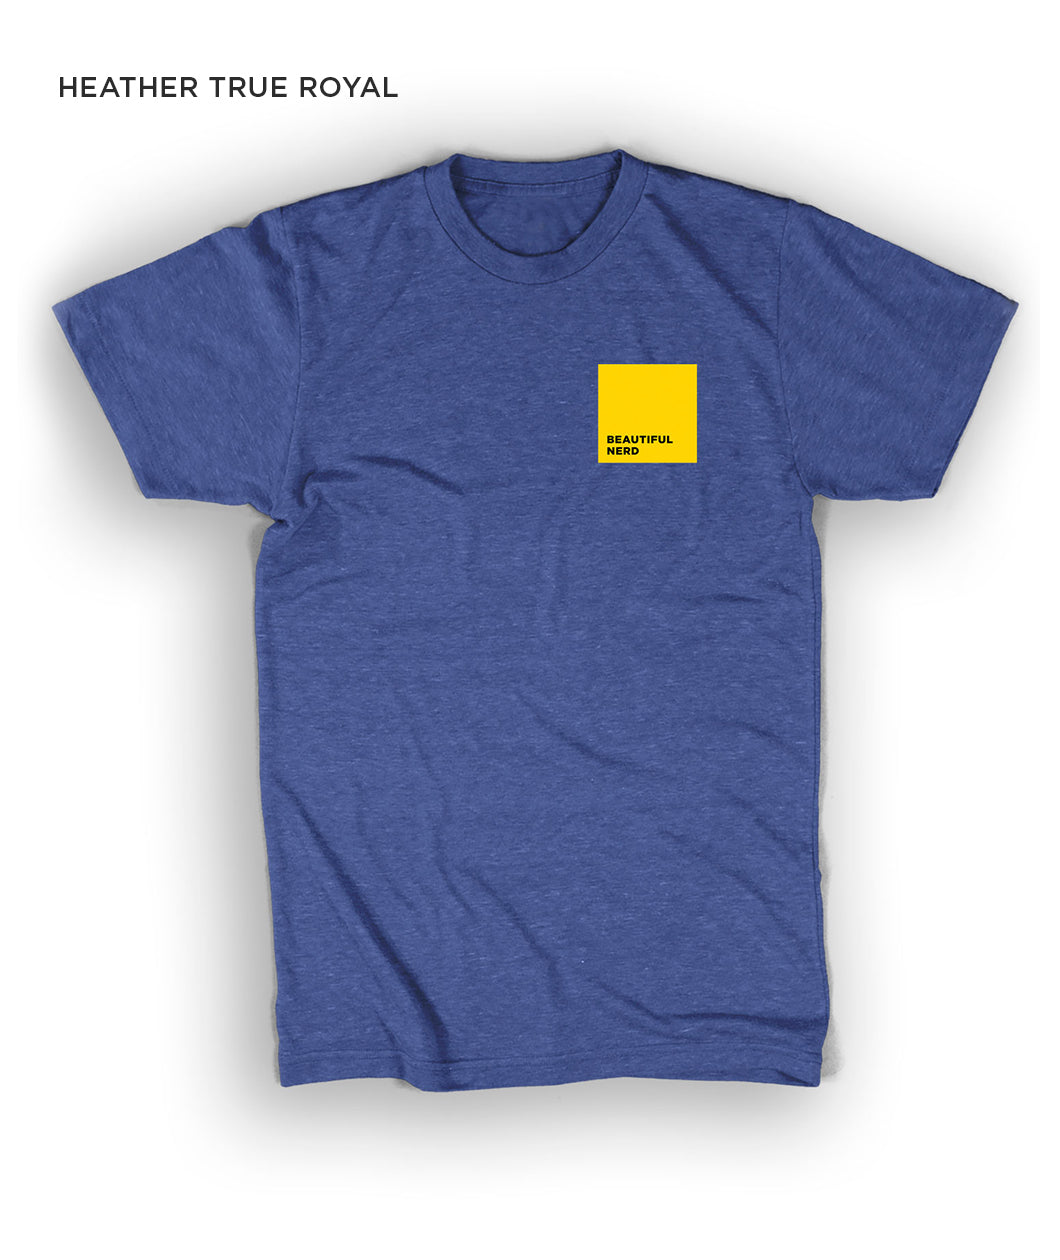 A royal blue short-sleeved t-shirt with a yellow square on the upper right side of the chest - by 99% Invisible